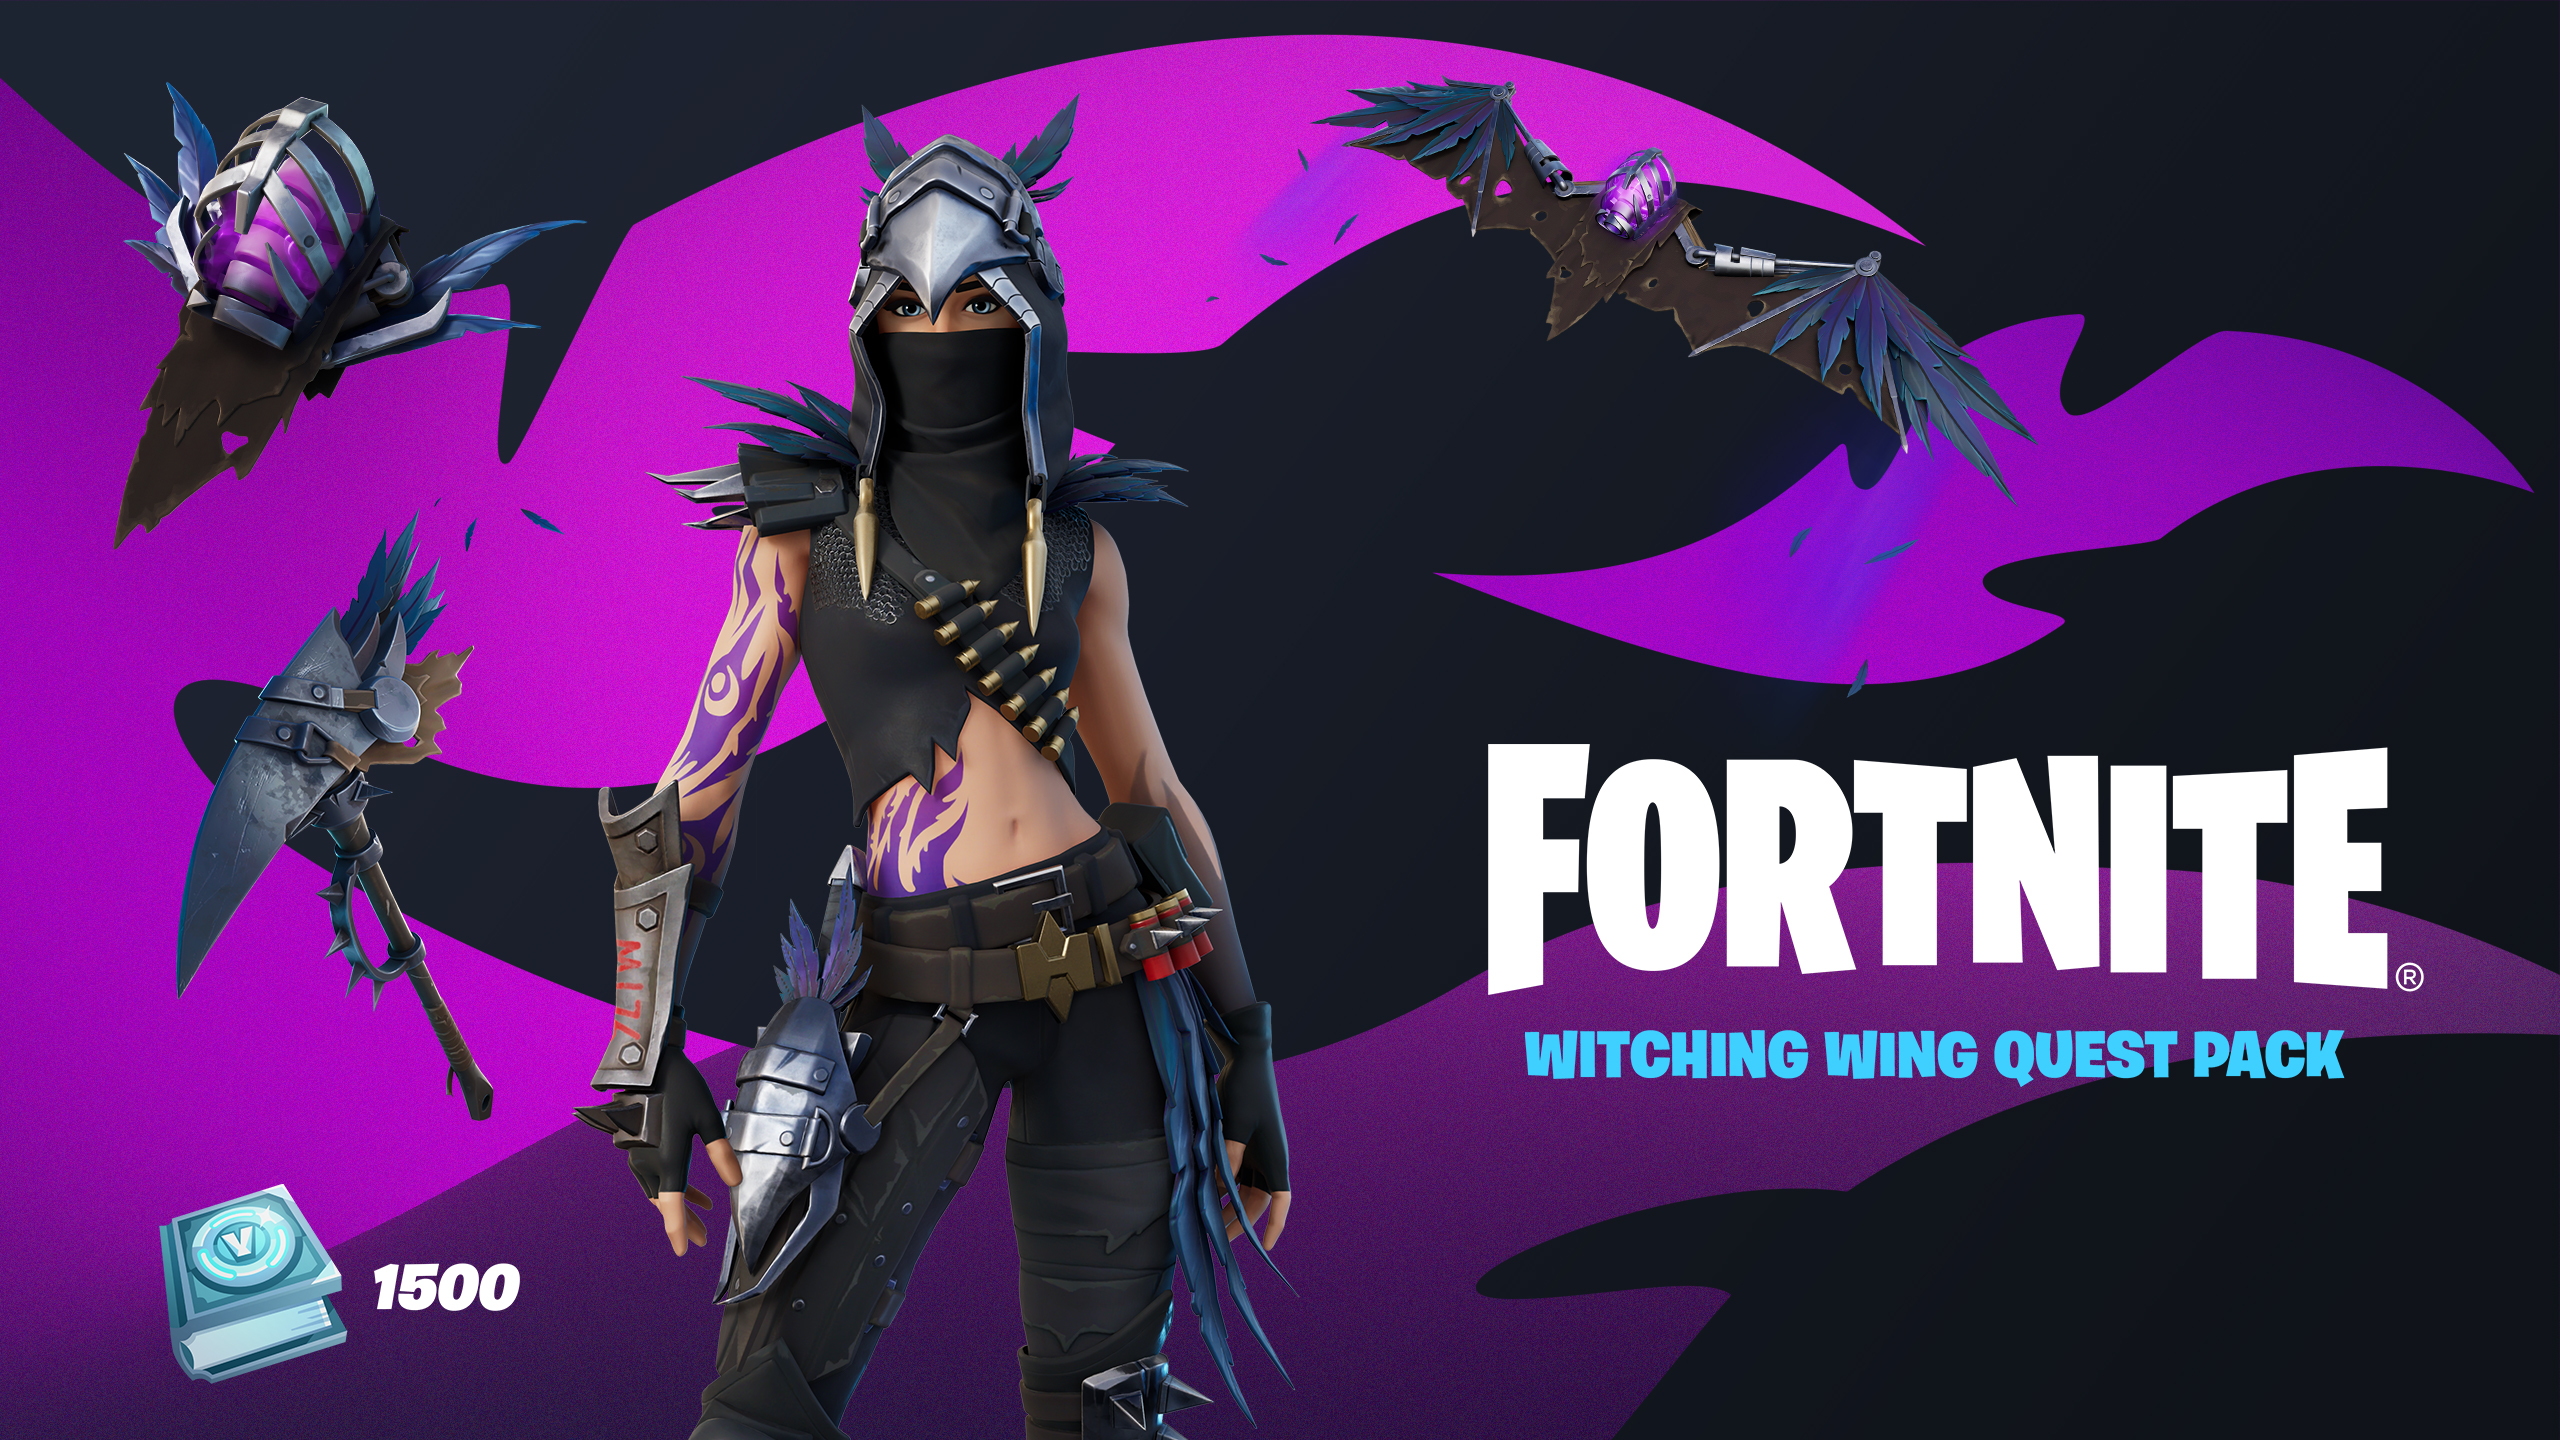 Fortnite - Witching Wing Quest Pack EU XBOX One / Xbox Series X|S CD Key 154.8 USD